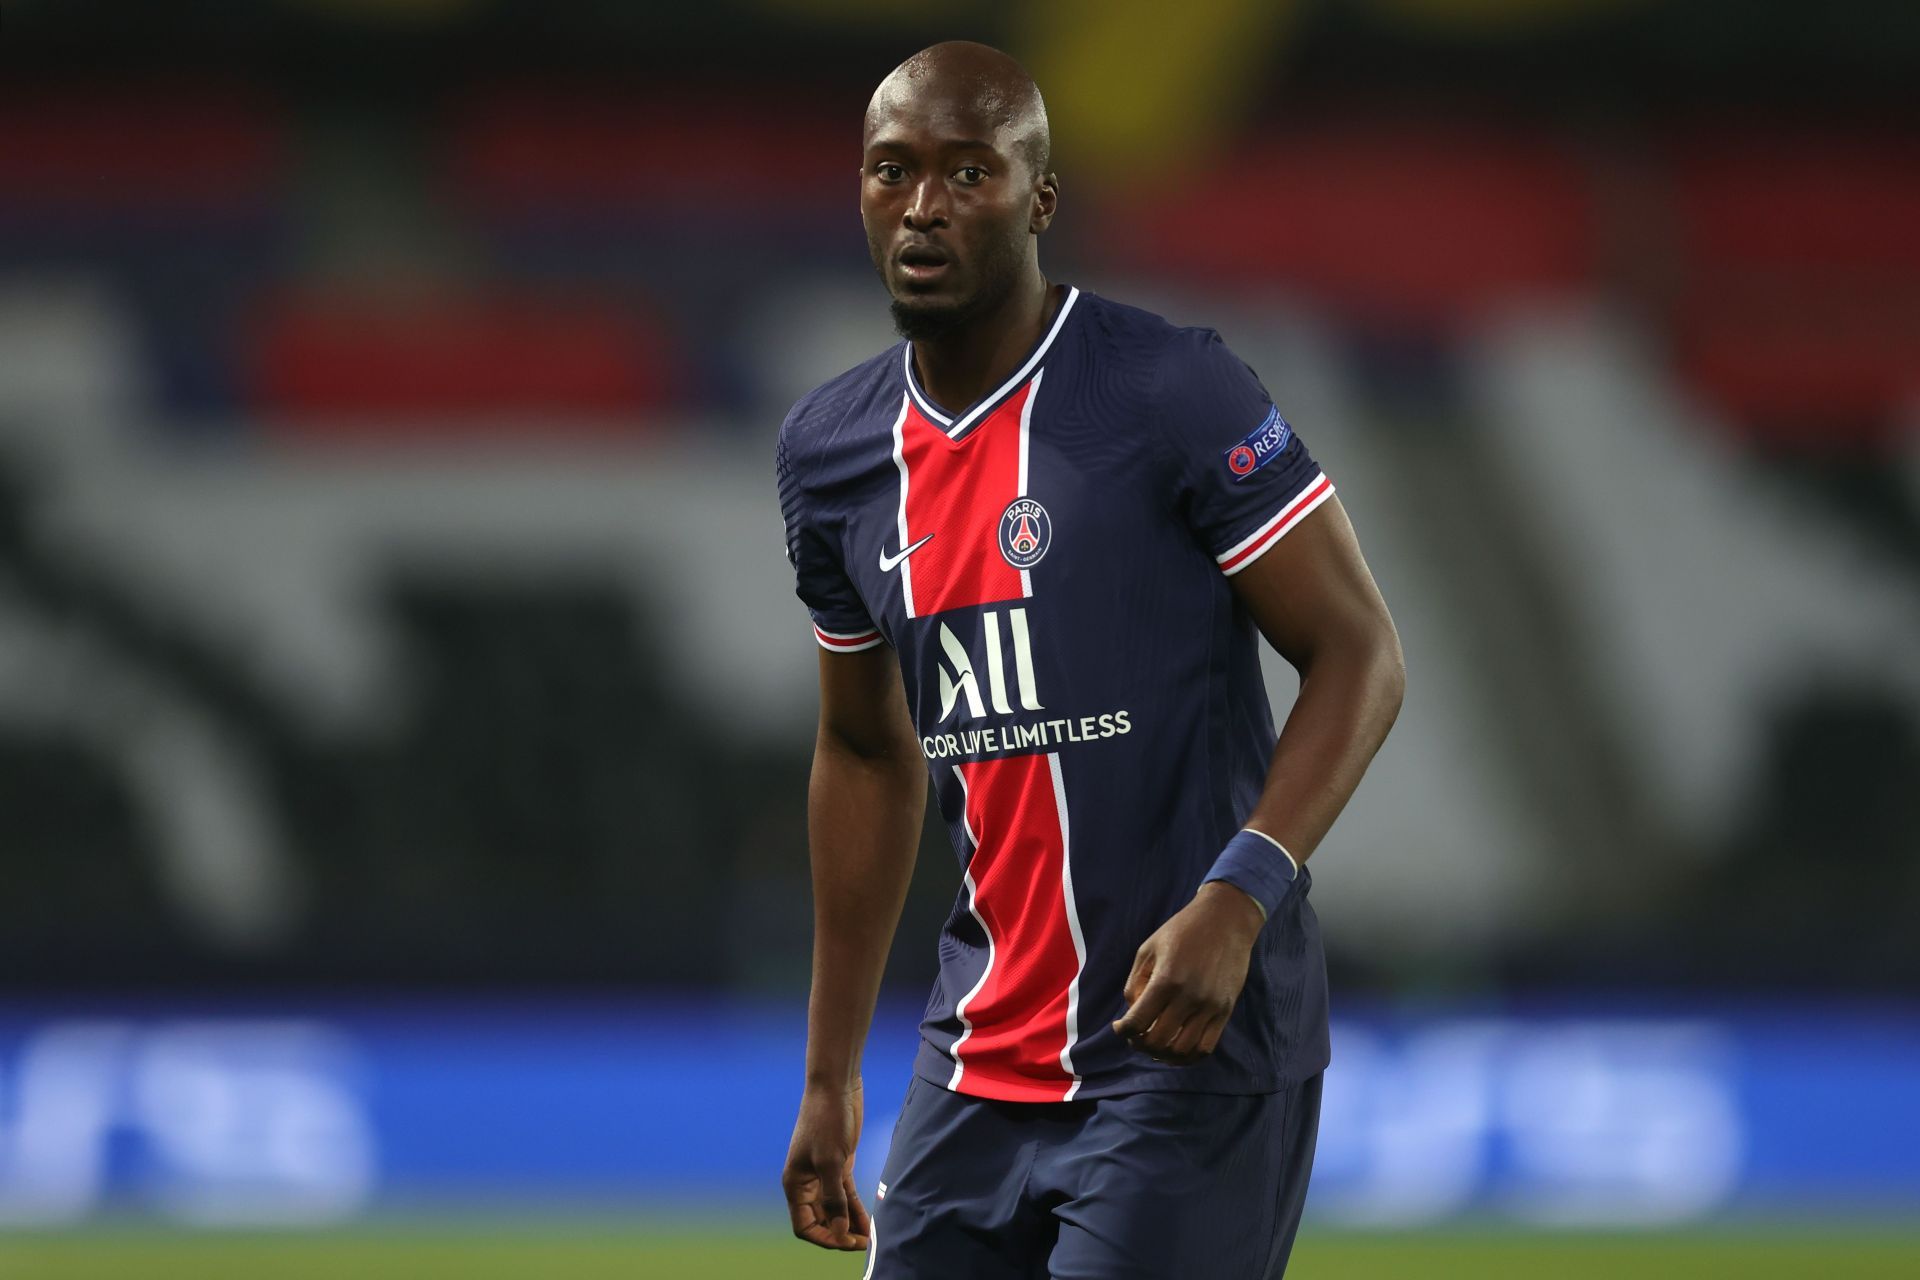 Danilo Pereira is the second highest goal scorer for his club in the league